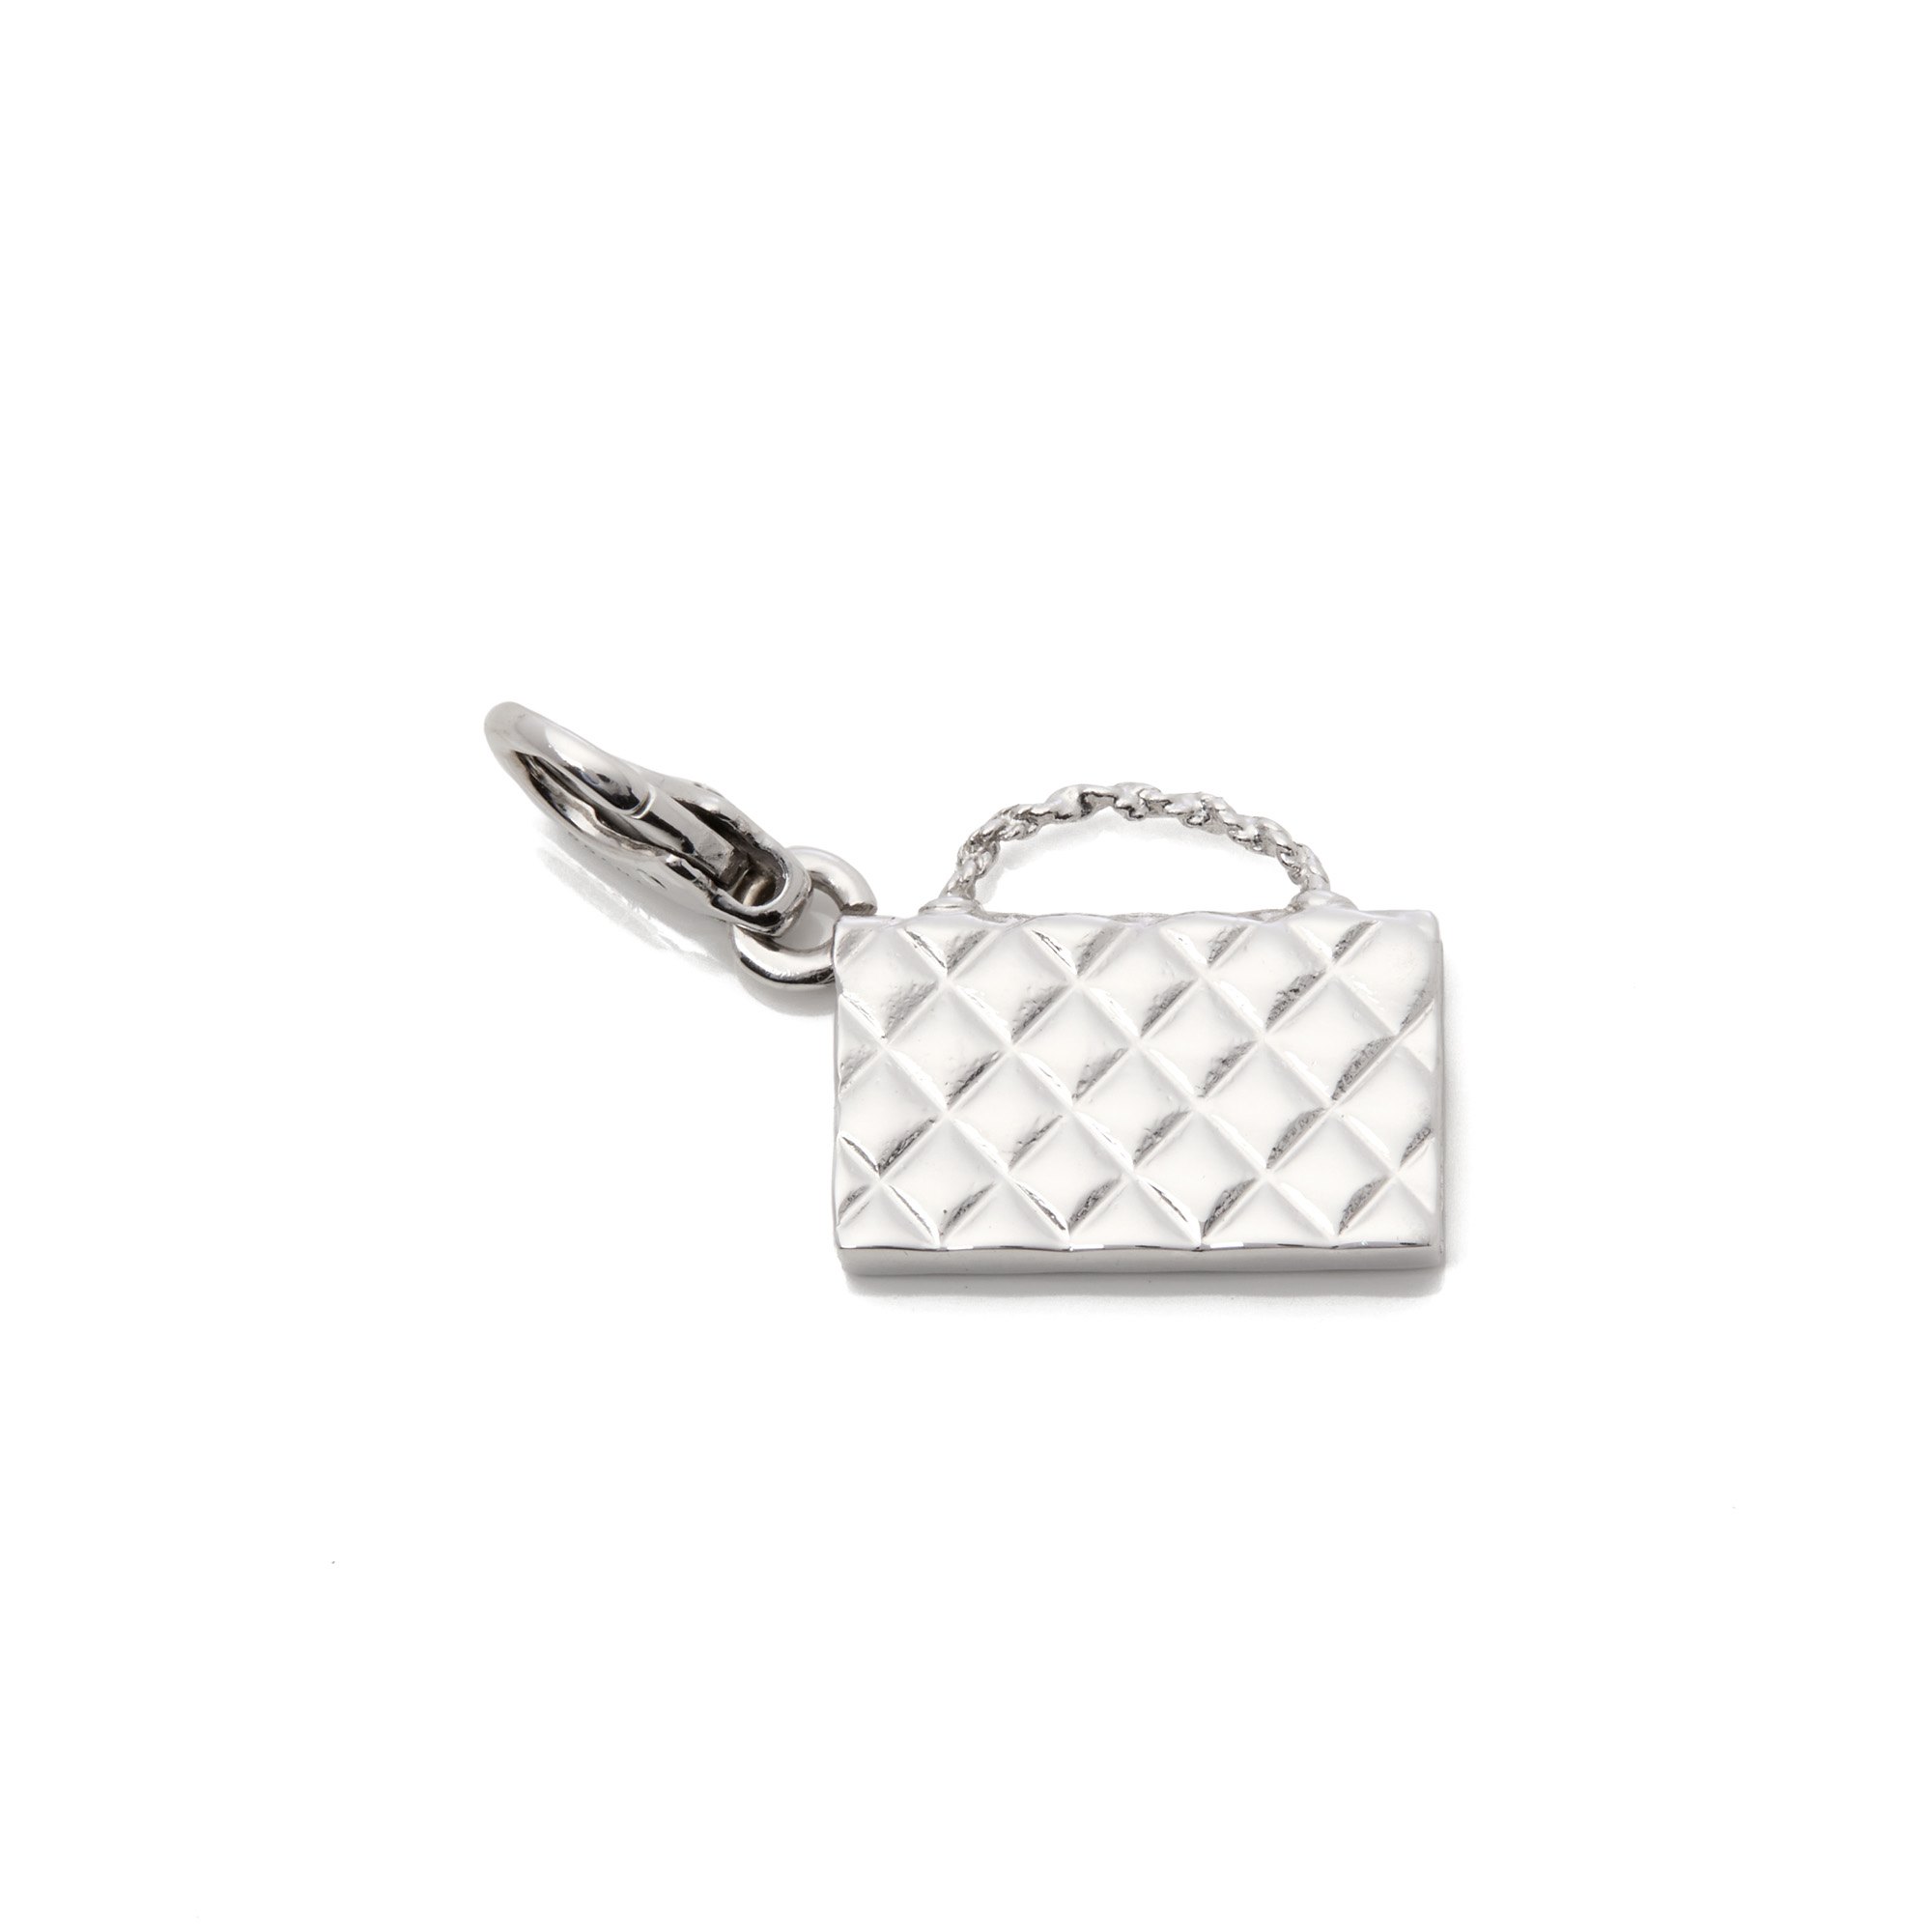 Chanel 18ct White Gold Quilted Bag Charm